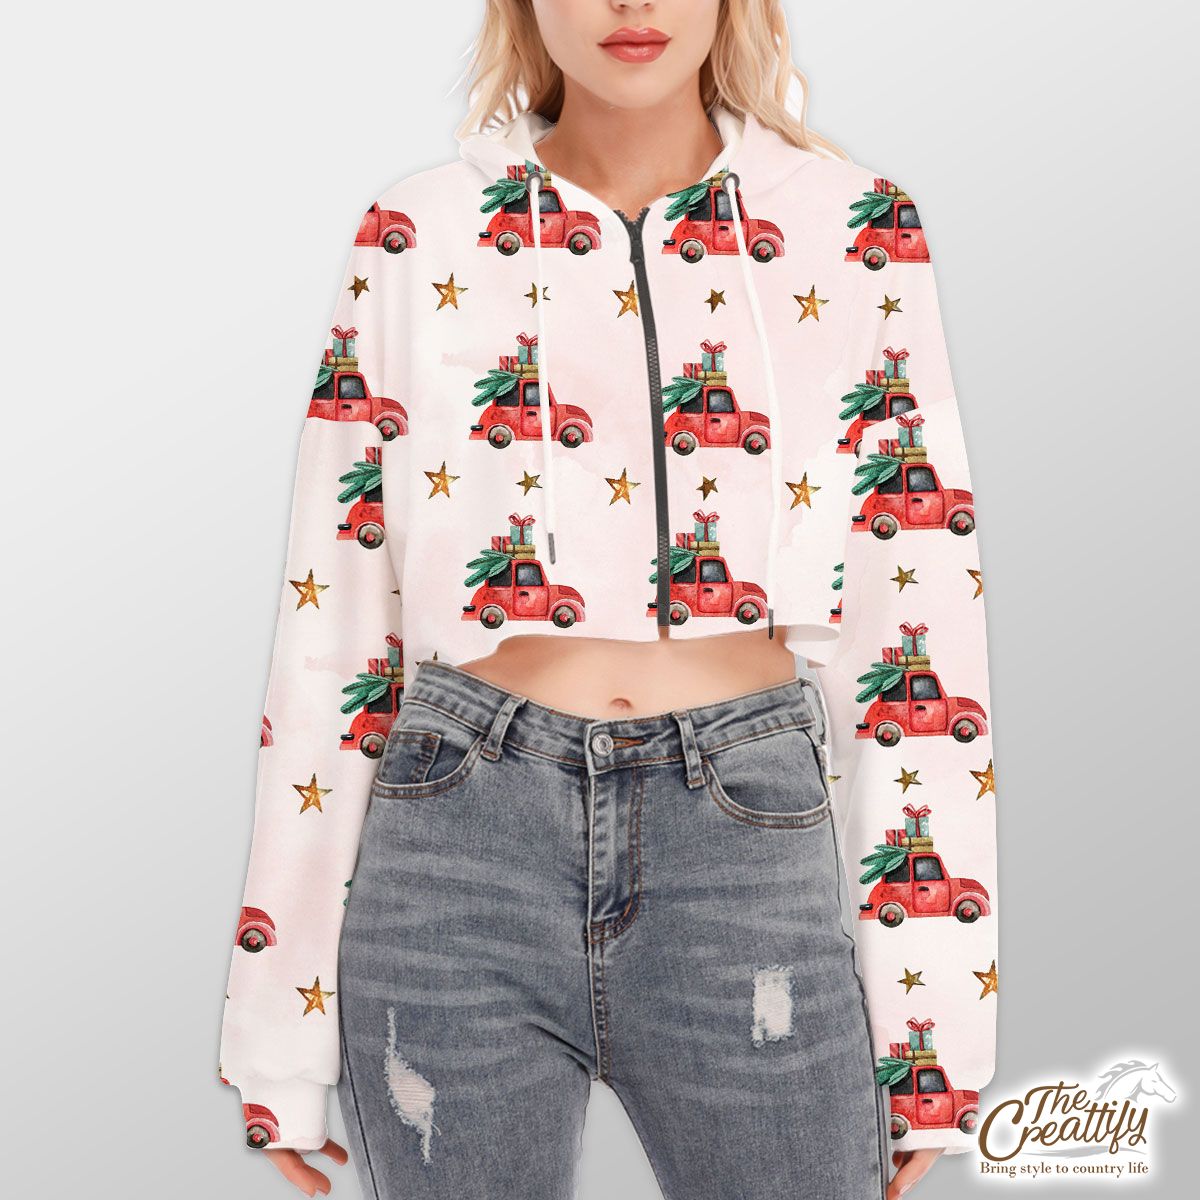 Watercolor Christmas Car With Christmas Gifts Star Pattern Hoodie With Zipper Closure